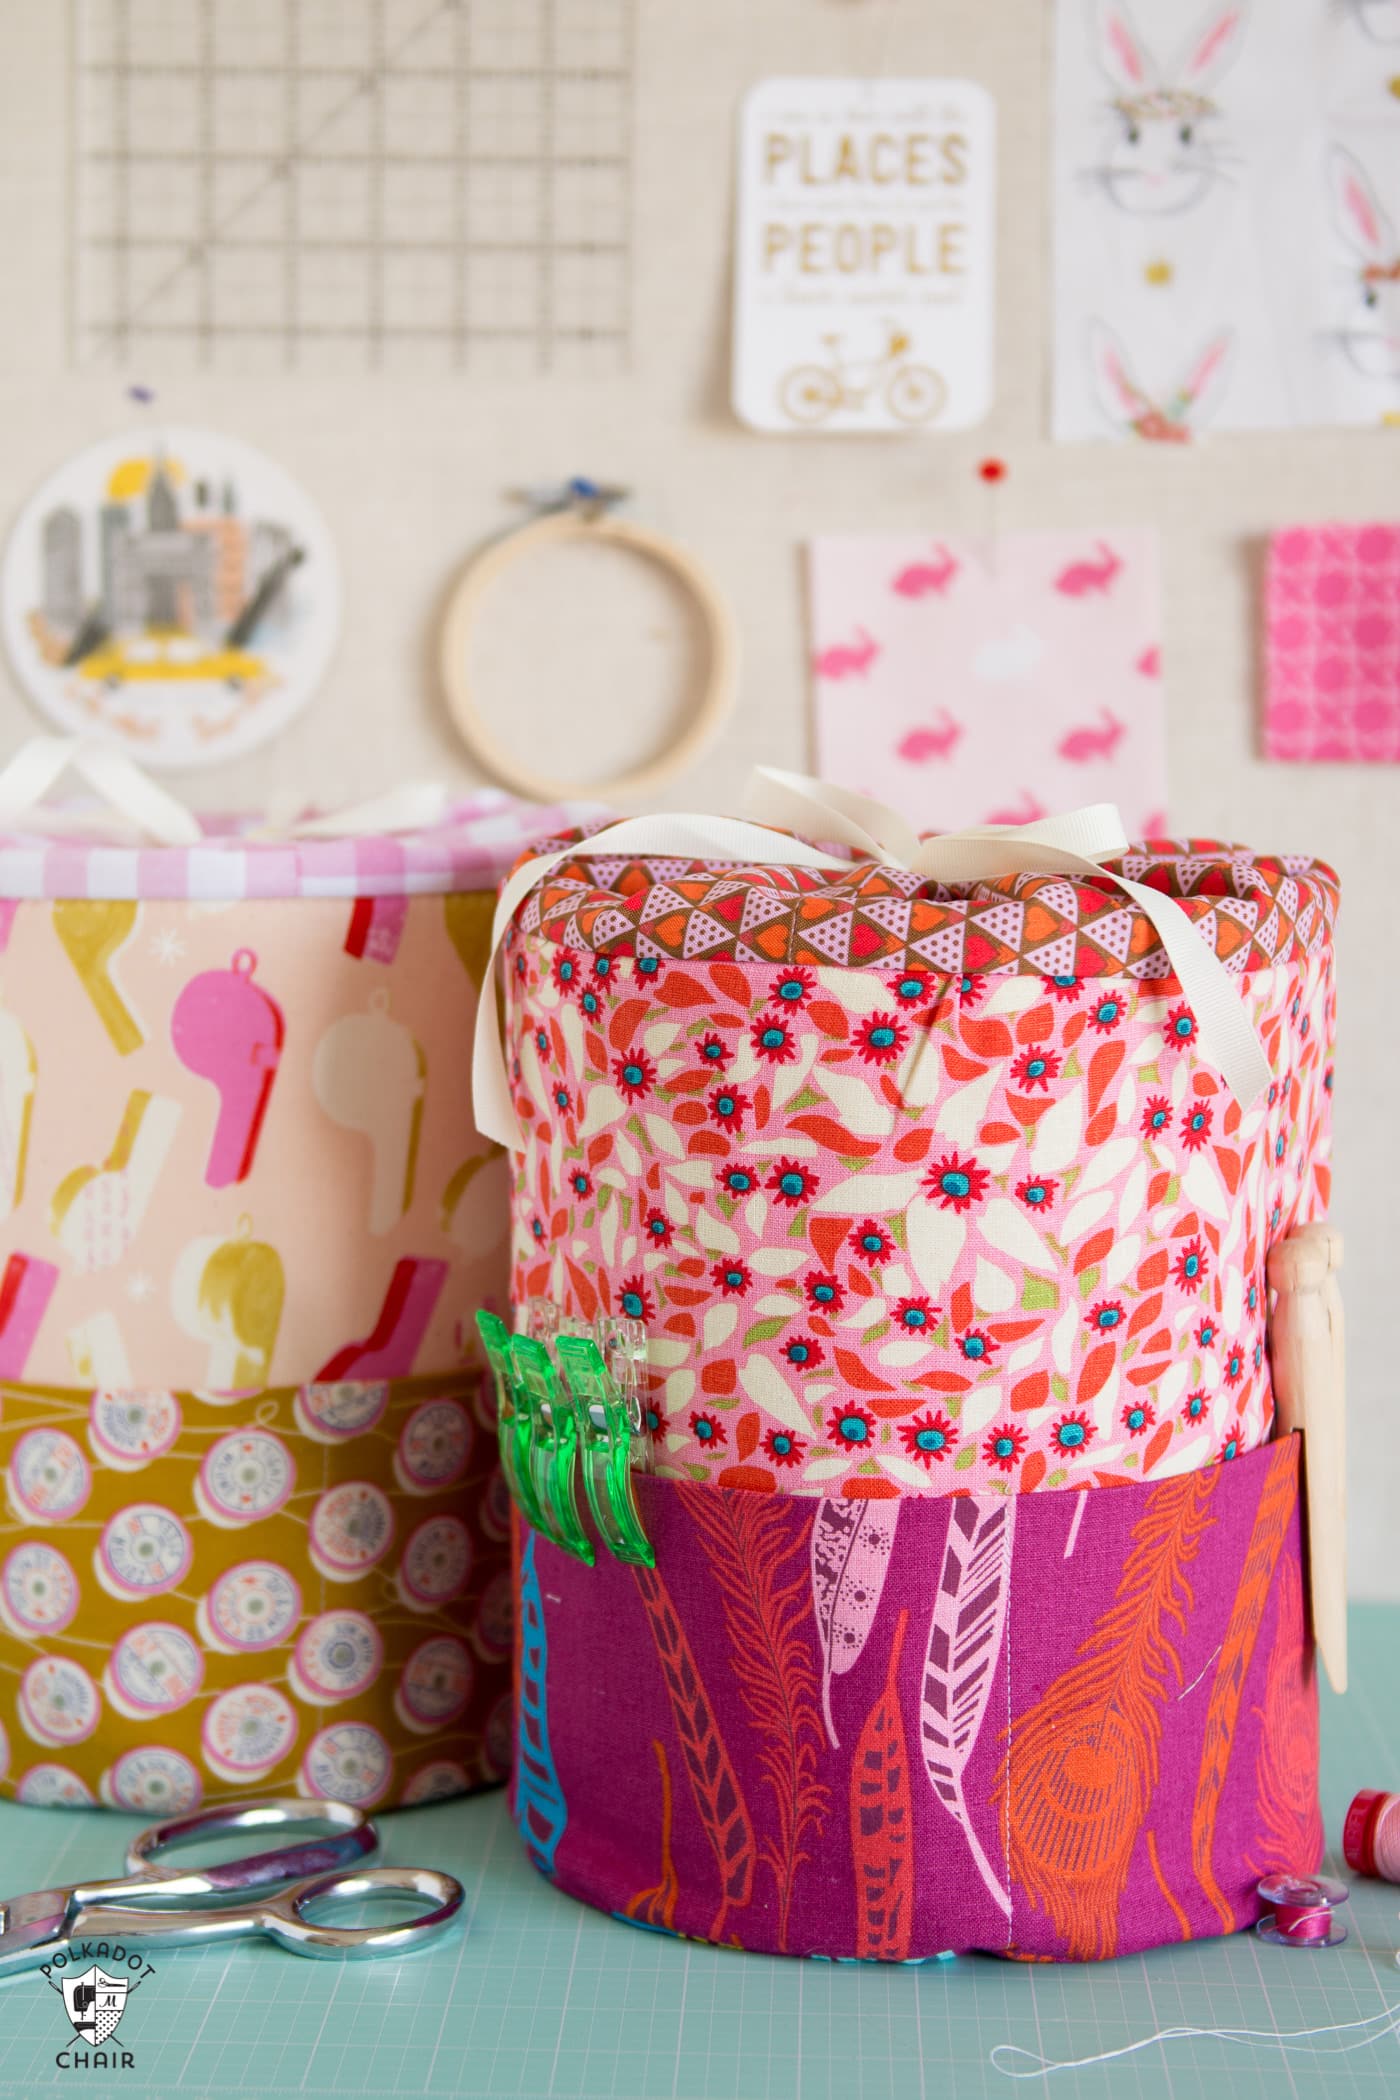 Learn how to make fabric storage bins with this sewing pattern. Round padded storage bins, great for organization projects! #fabricbins #fabricstorage #fabricbasket #sewingpattern #DIYBasket